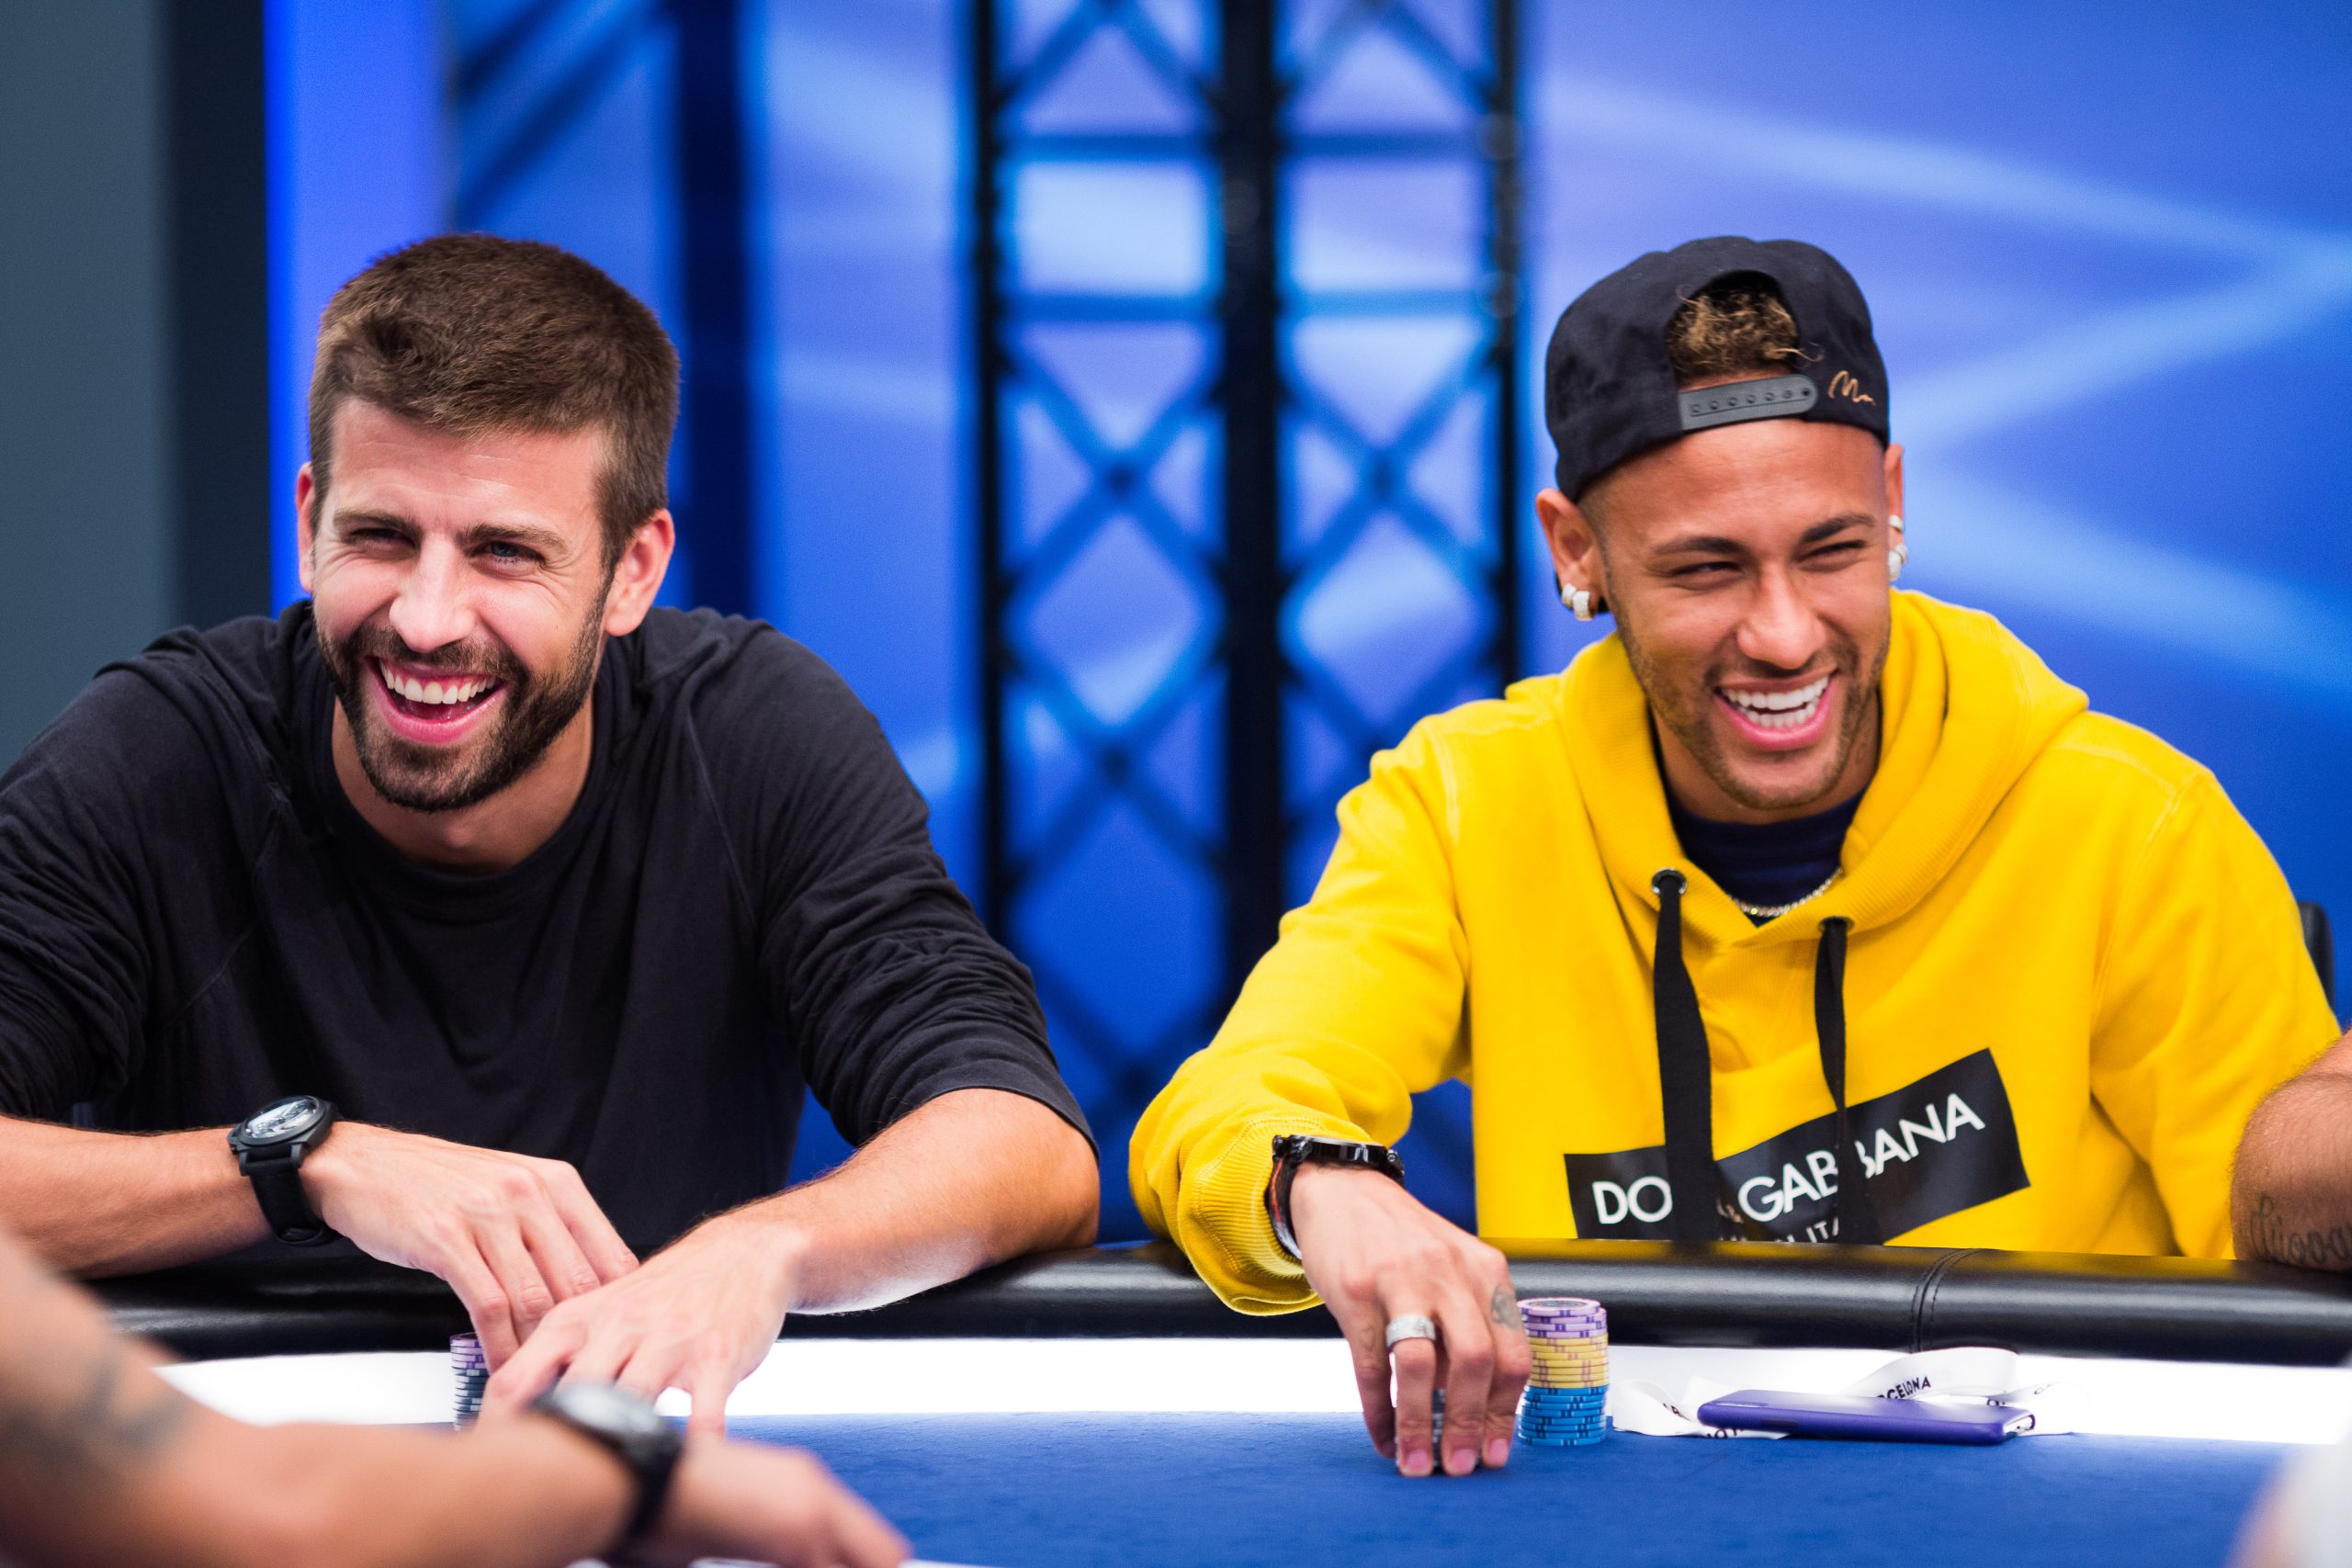 Gerard Piqué, left, and Neymar are regulars at EPT stops